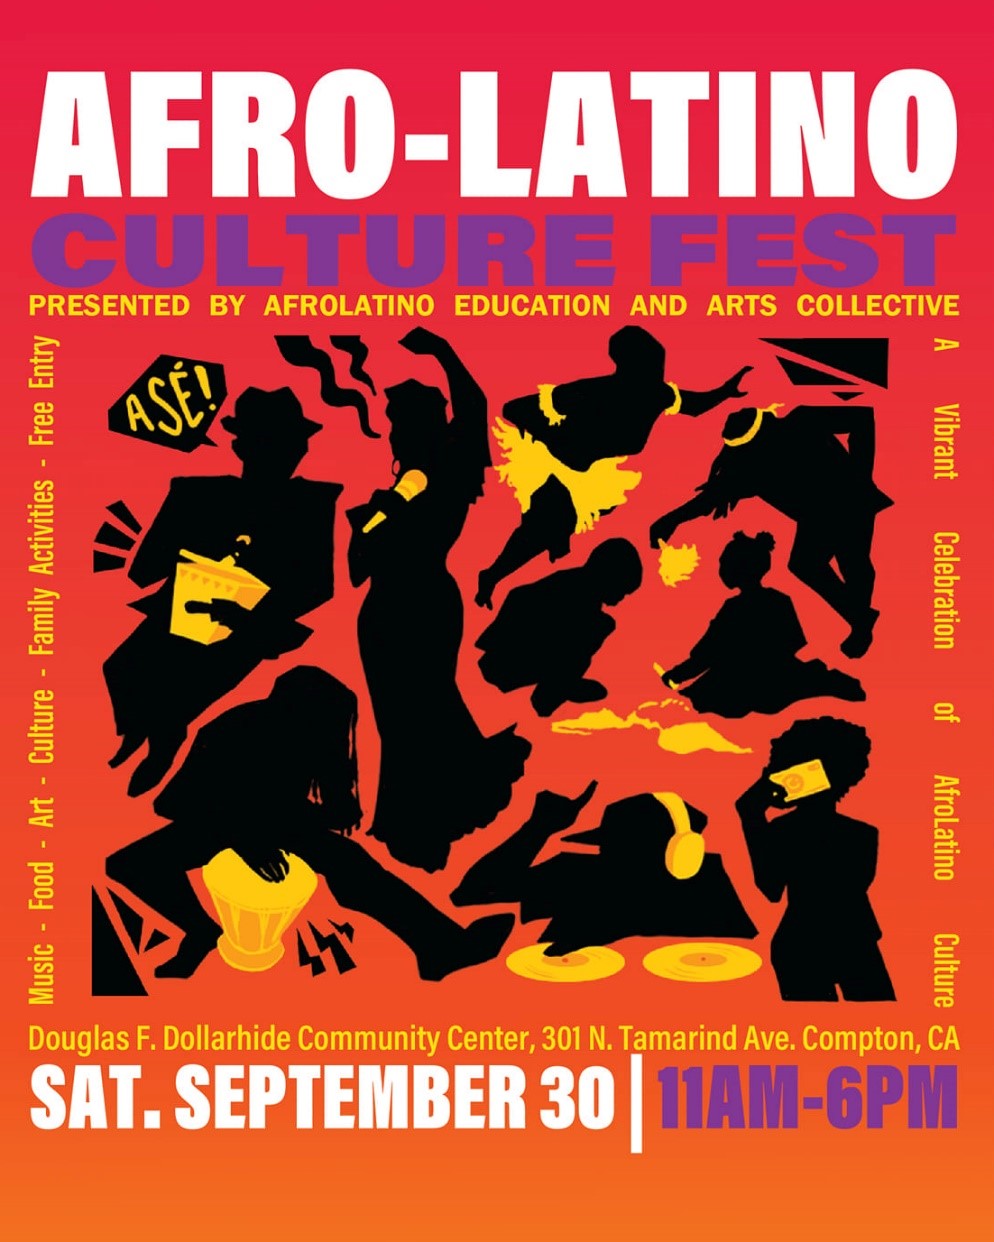 Afro-Latino Culture Fest flyer with people dancing and event text.